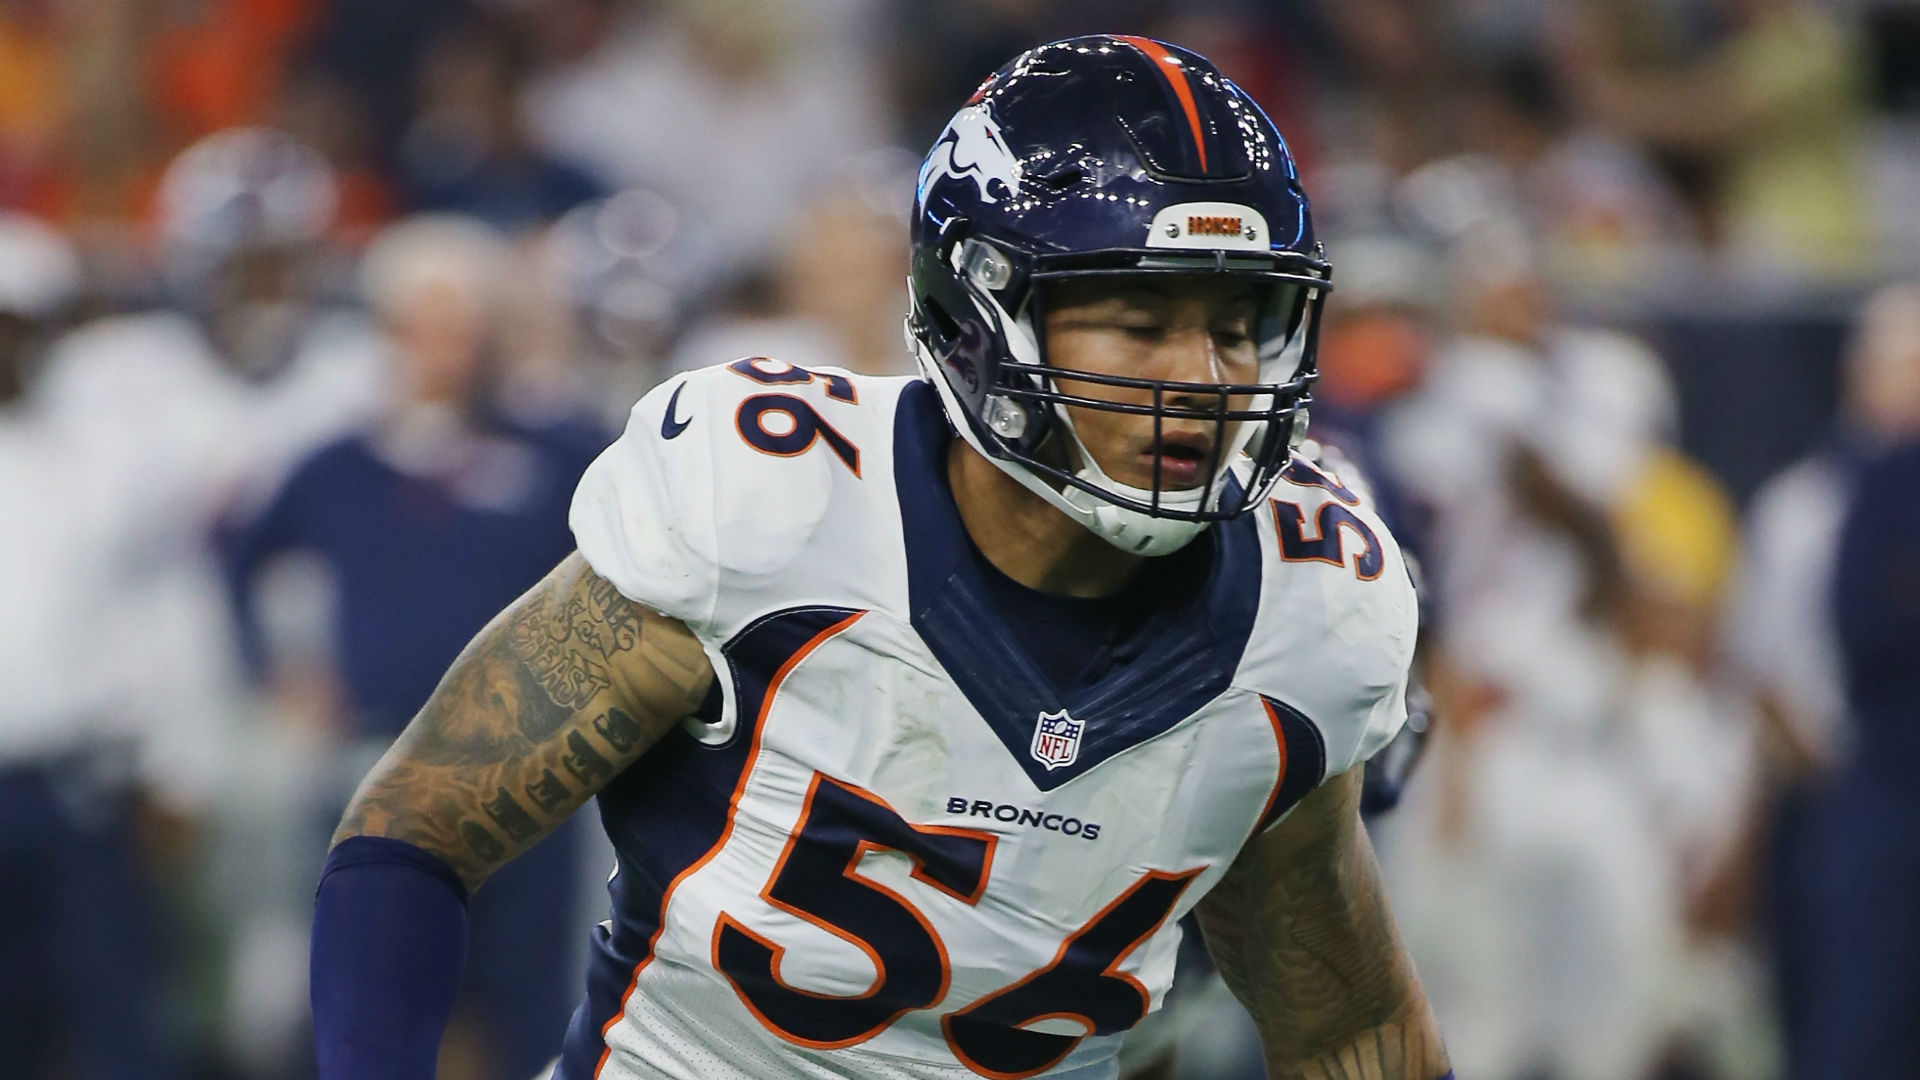 NFL free agency rumors: Former Broncos first-round pick Shane Ray to sign with Ravens